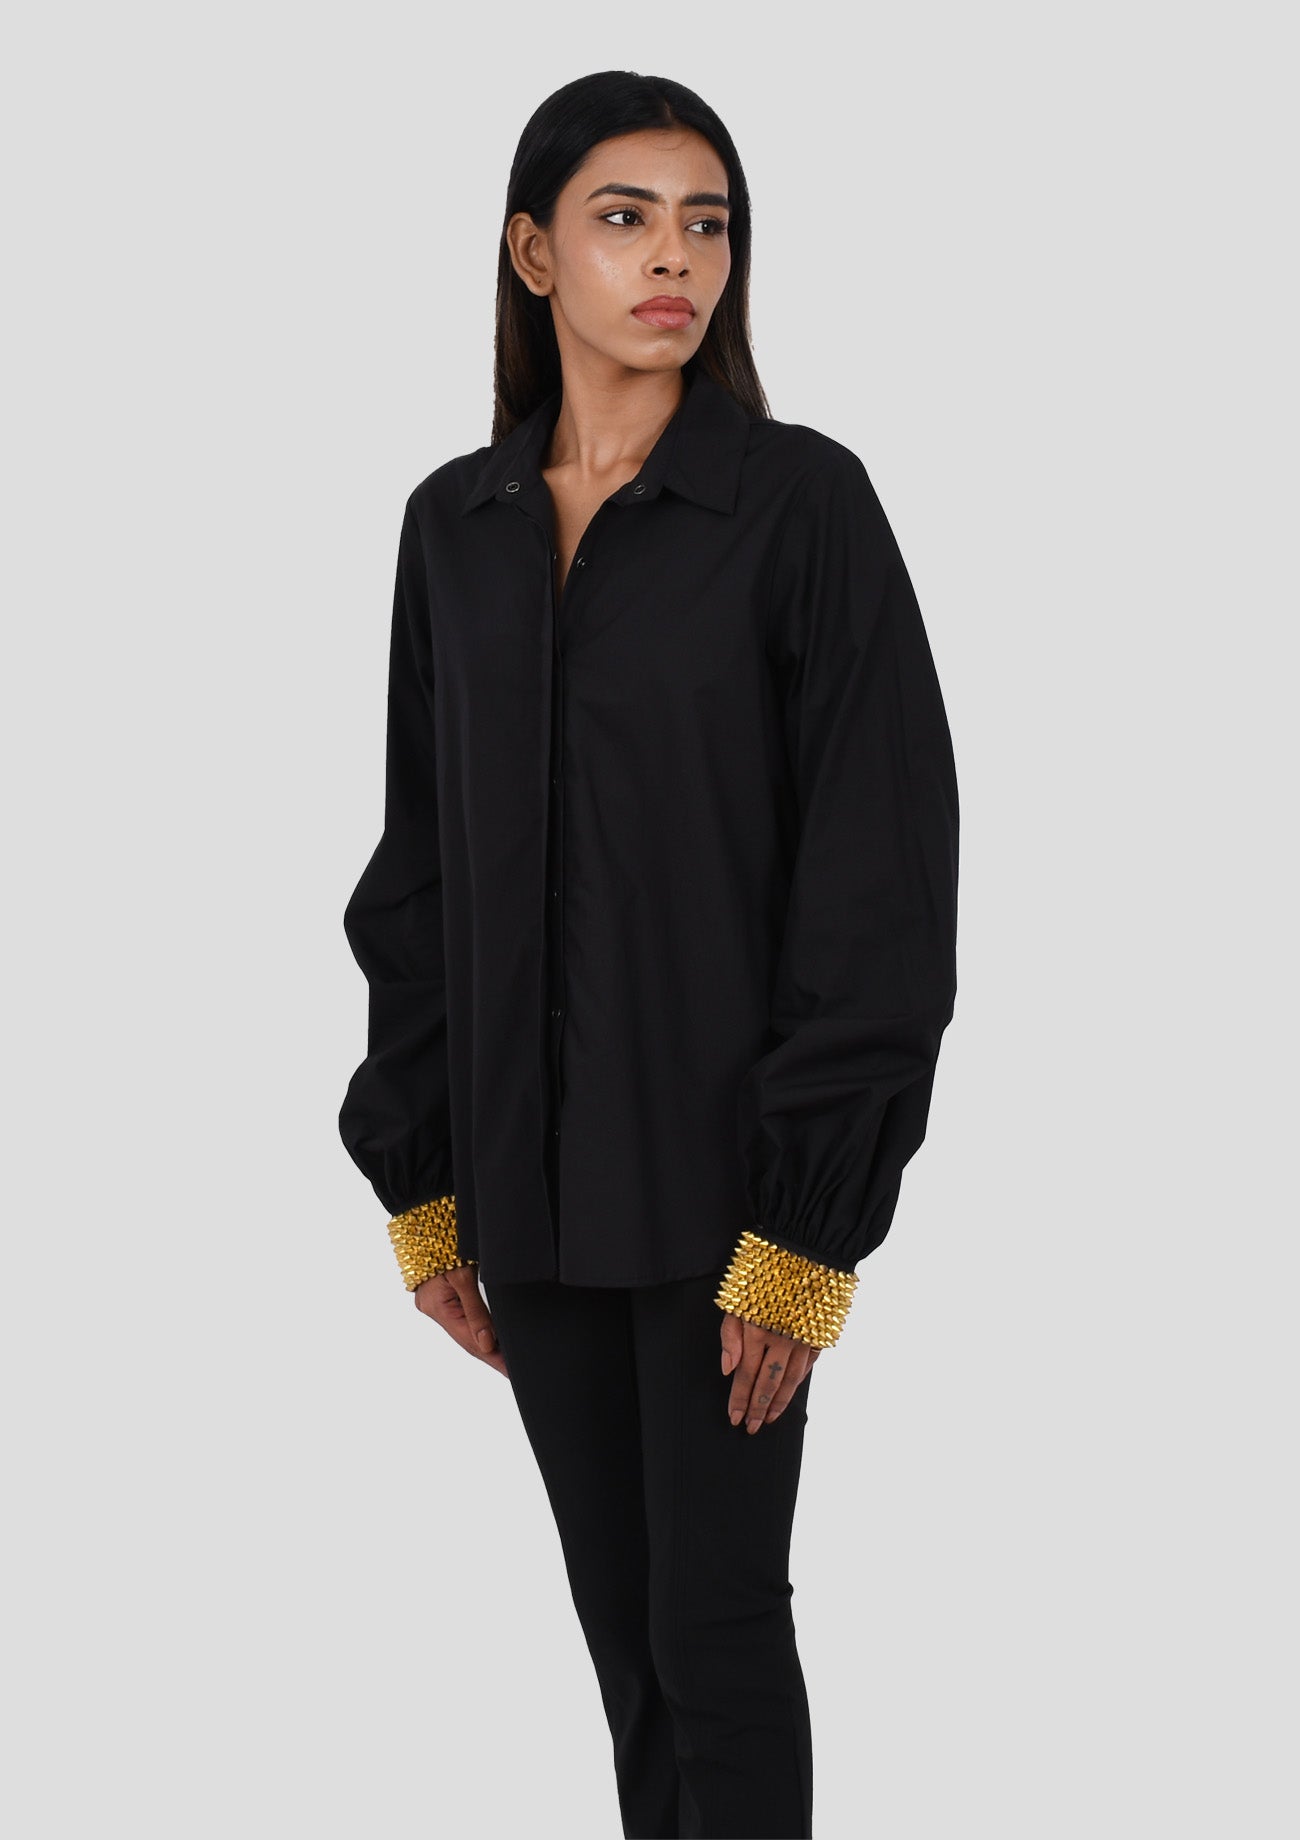 Black Cotton Shirt With Gold Spikes Embroidered On Cuff